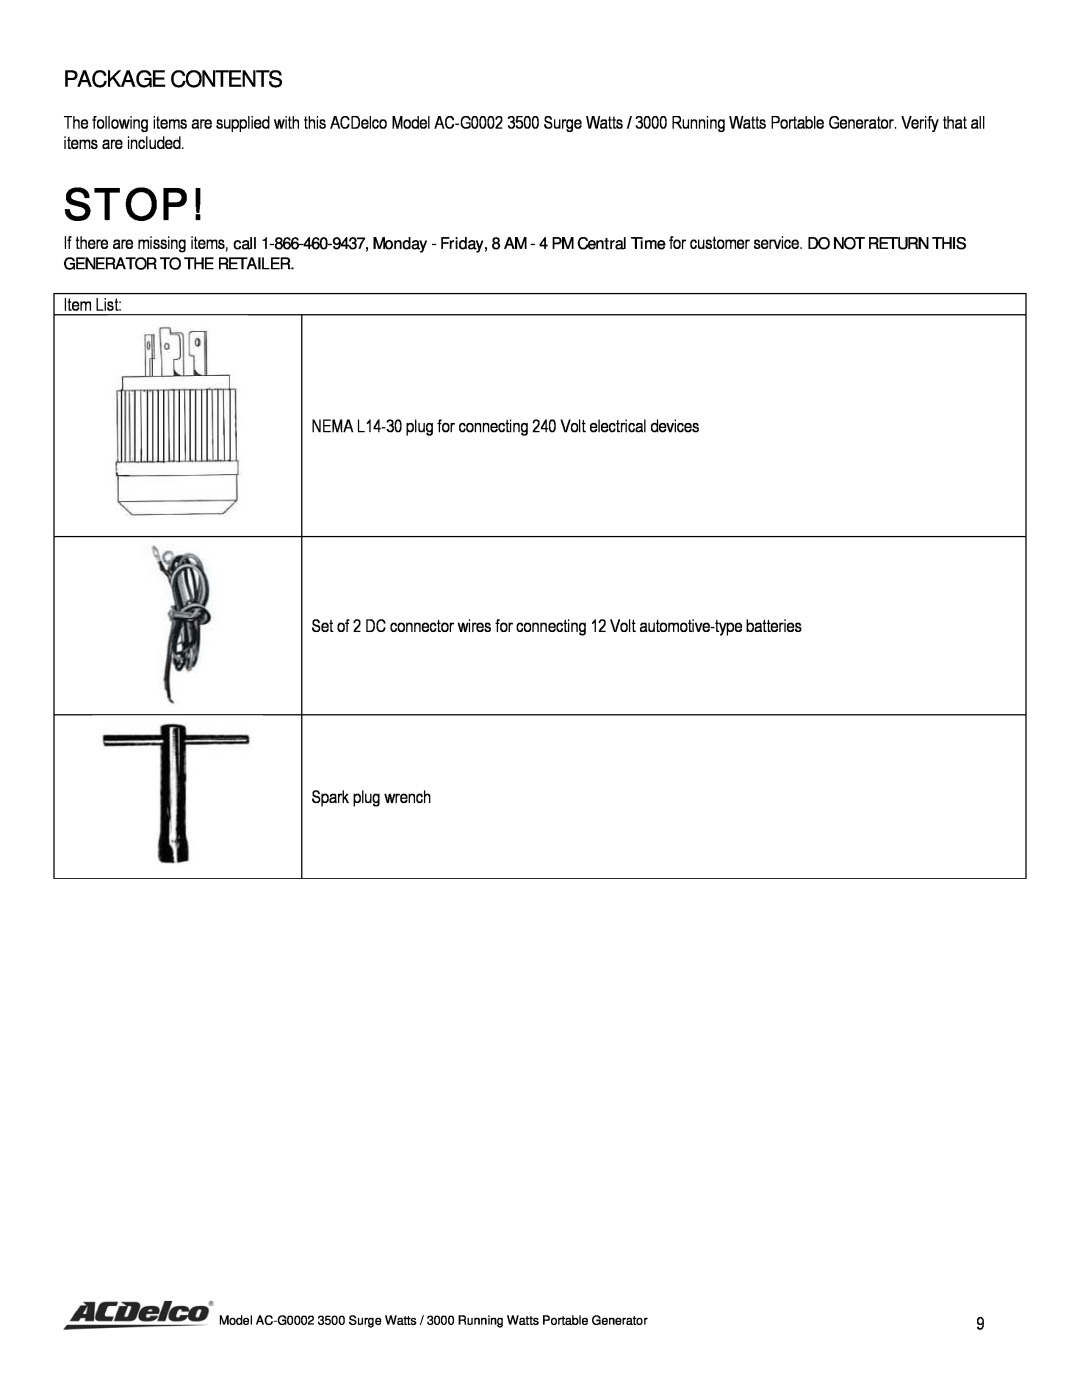 ACDelco AC-G0002 instruction manual Package Contents, Stop, Generator To The Retailer 